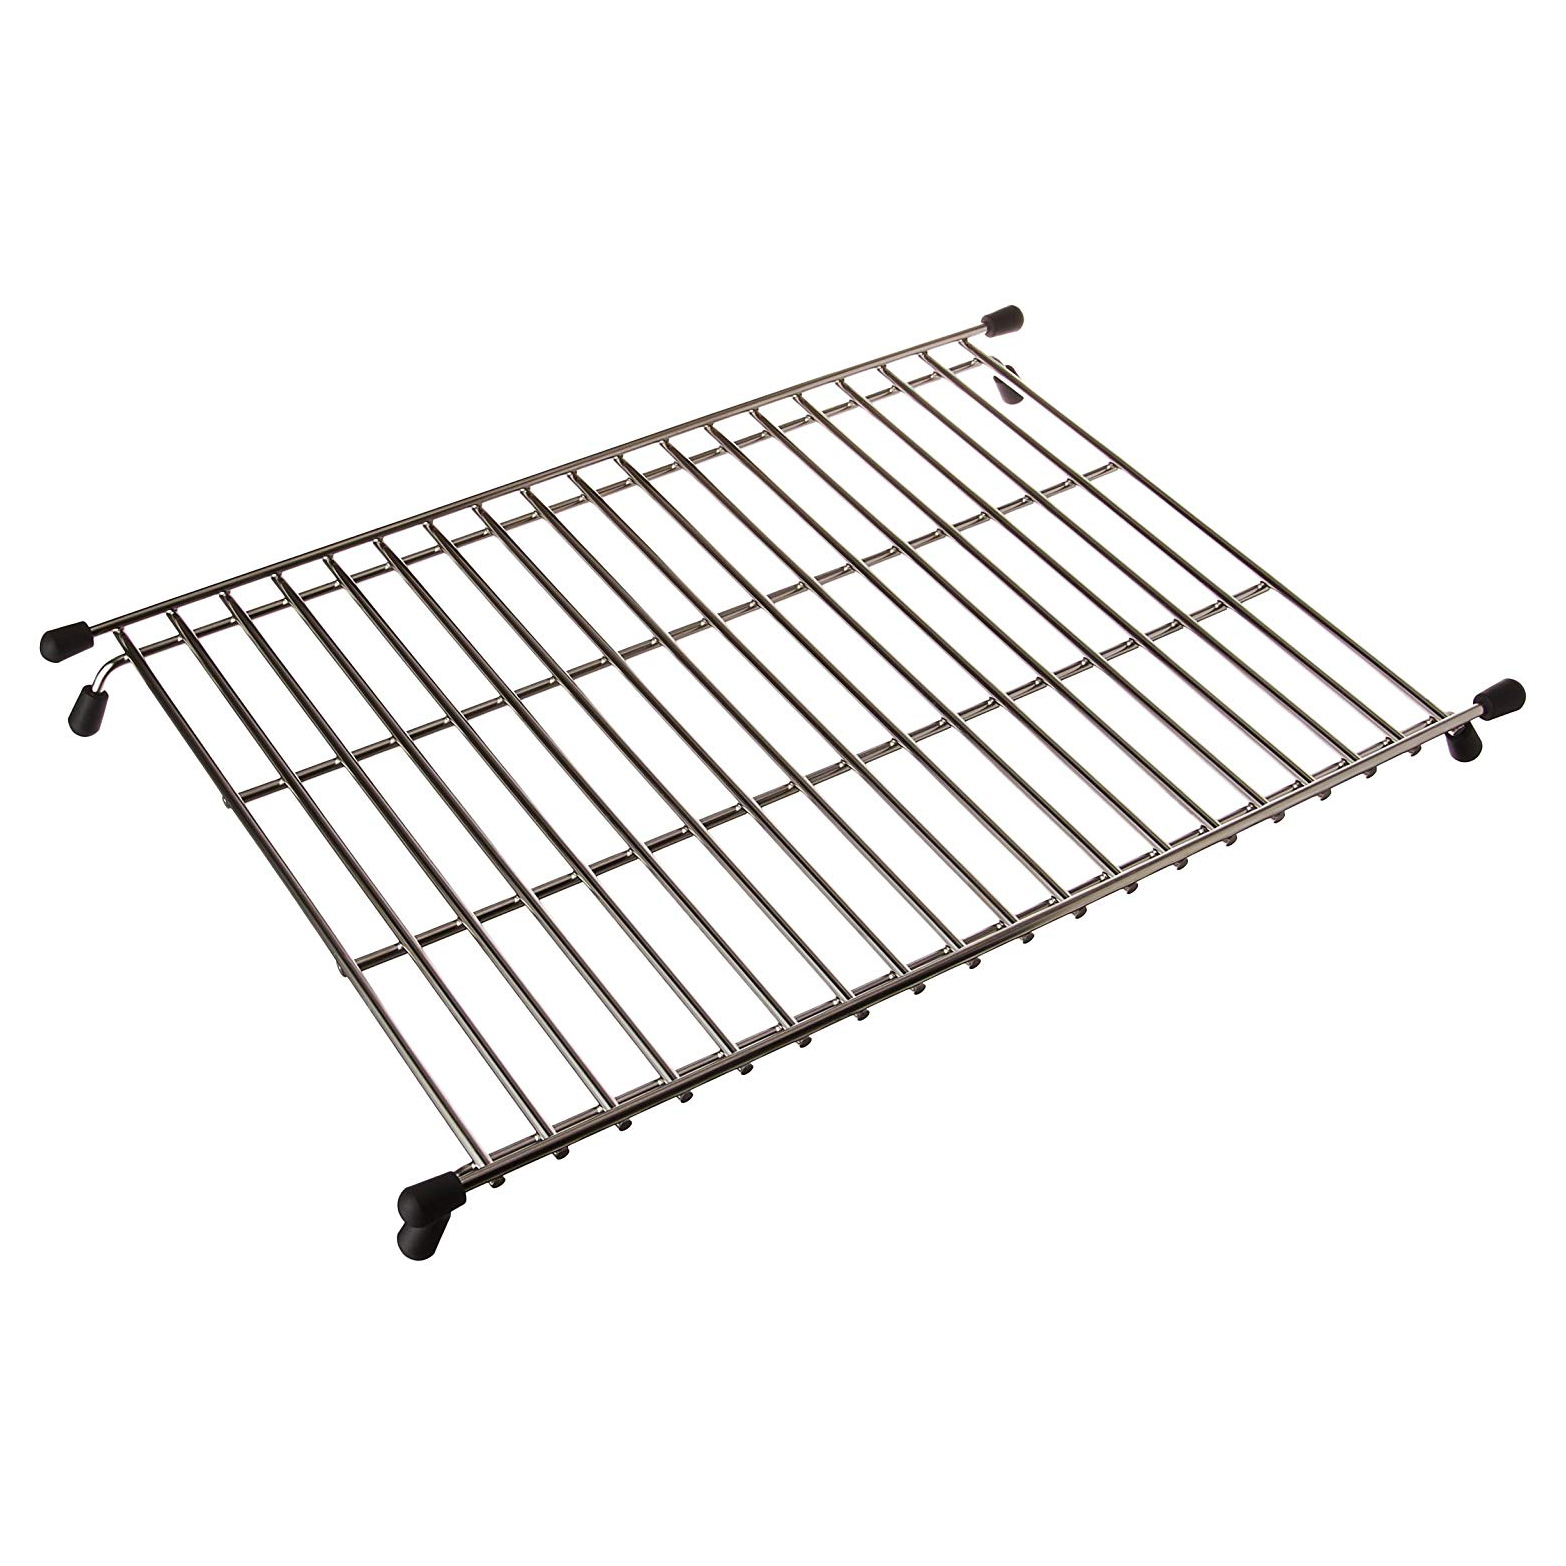 Precis 10x15-1/8" Floating Stainless Steel Grid